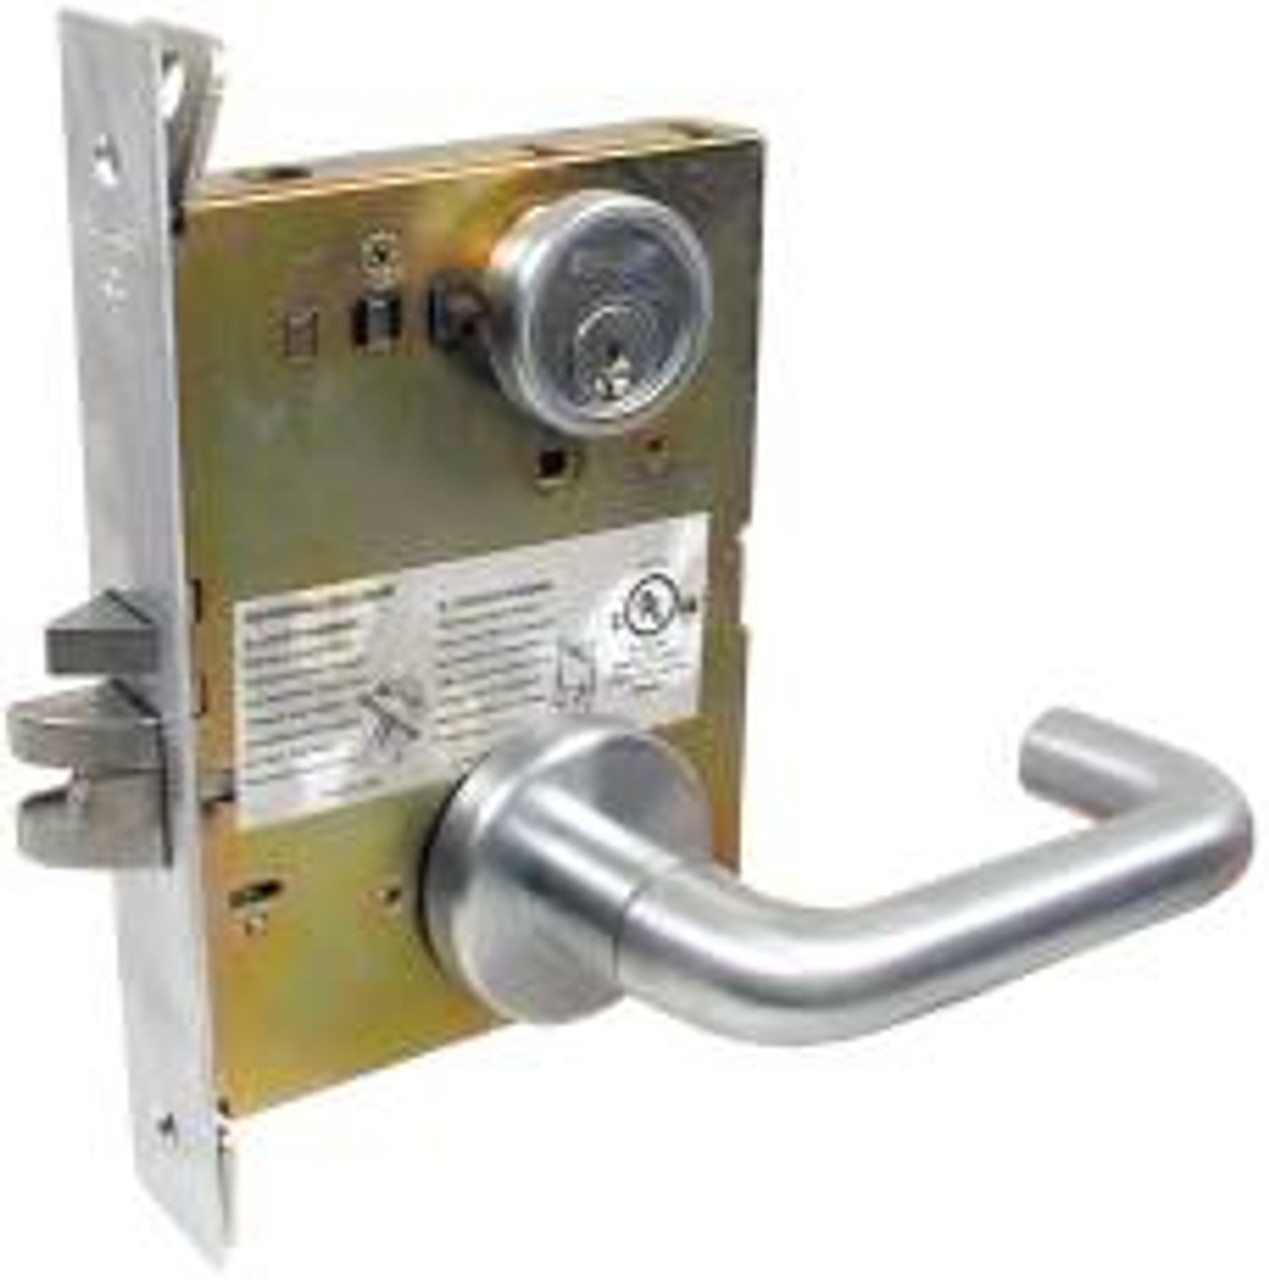 Schlage CO-100-MS50 Electronic Mortise Lock with Lockdown